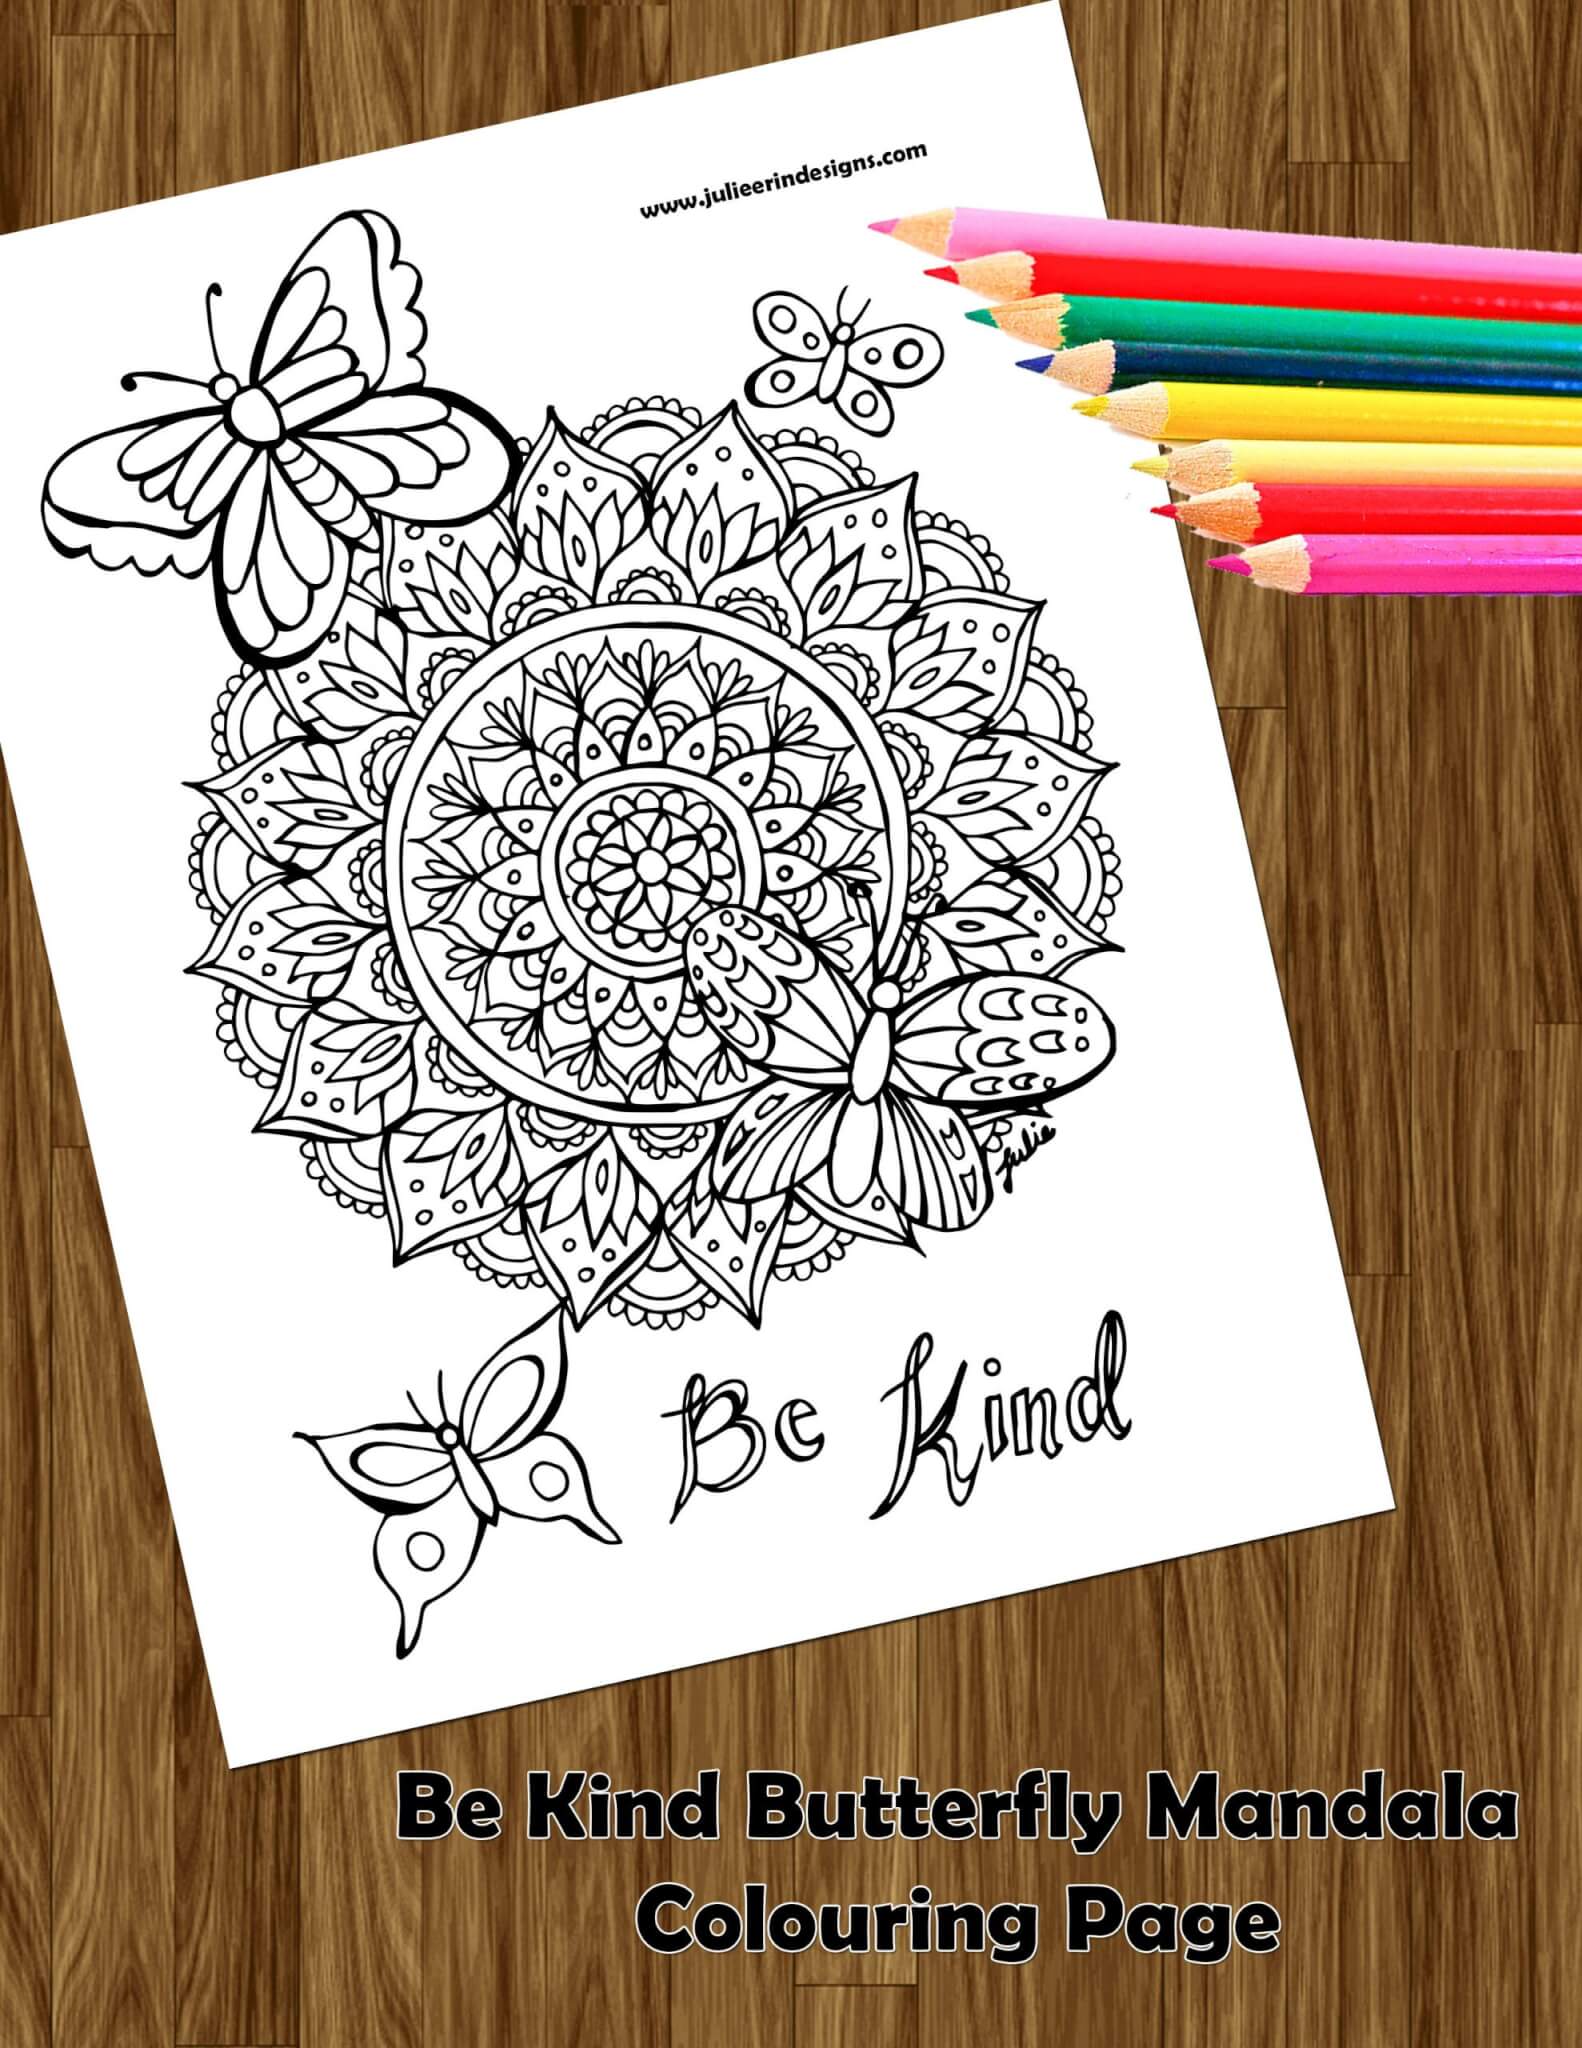 Be kind butterfly mandala colouring page